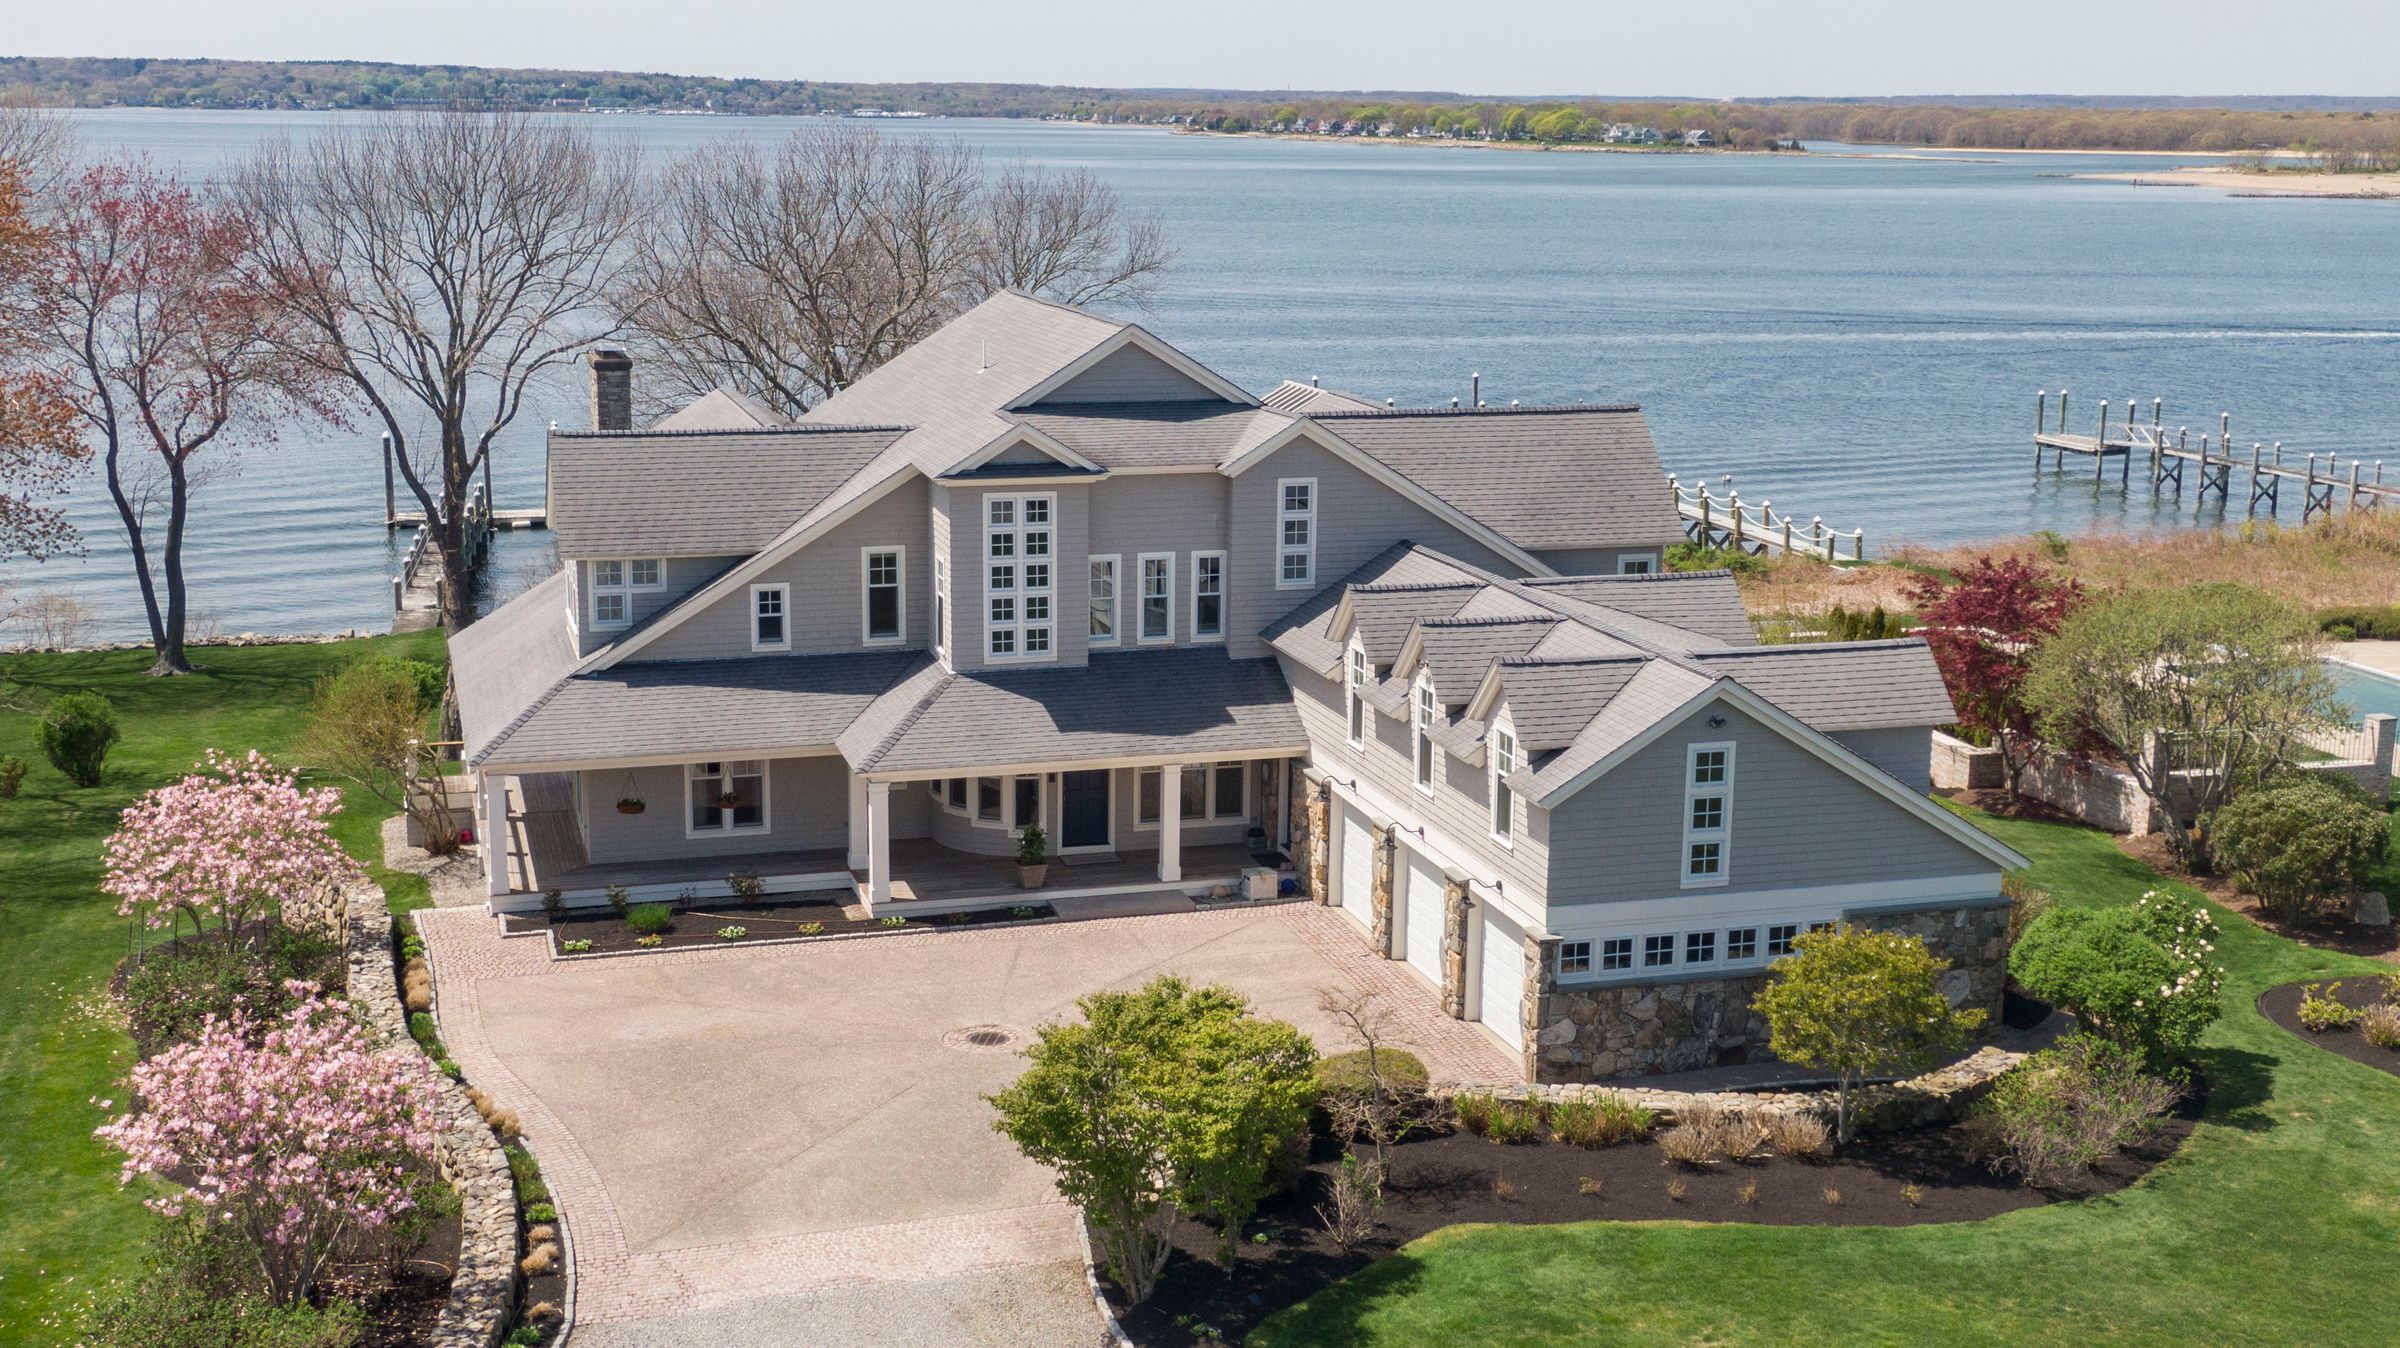 $3.2M sale of waterfront Warwick home sets record for city